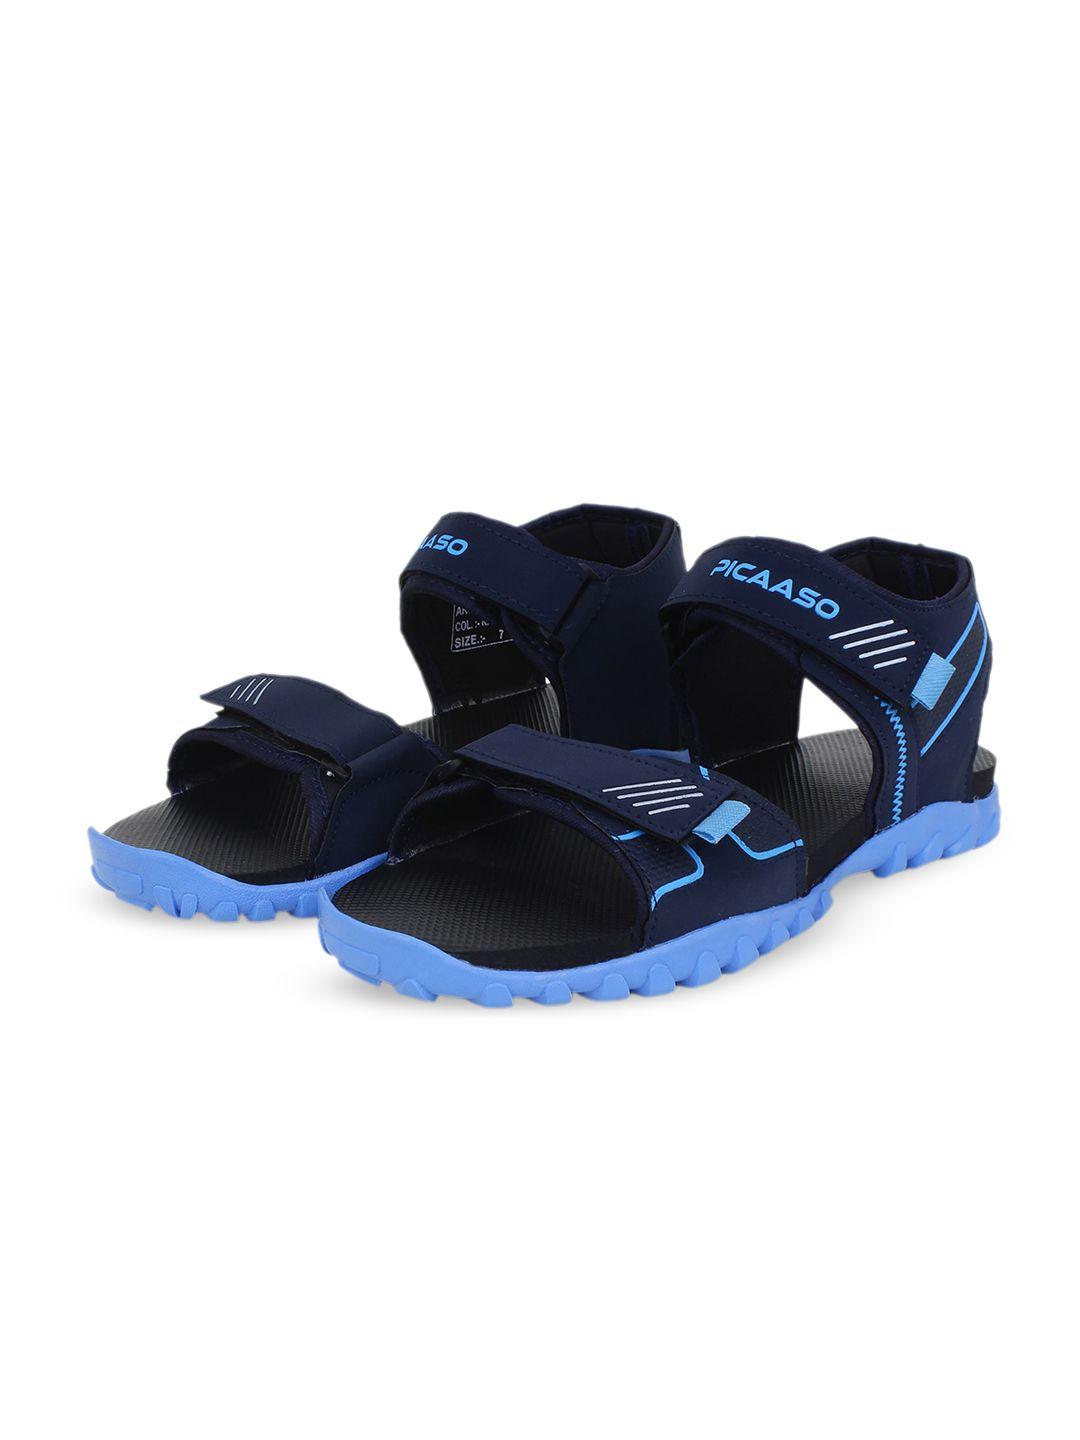 picaaso-men-textured-sports-sandals-with-velcro-closure